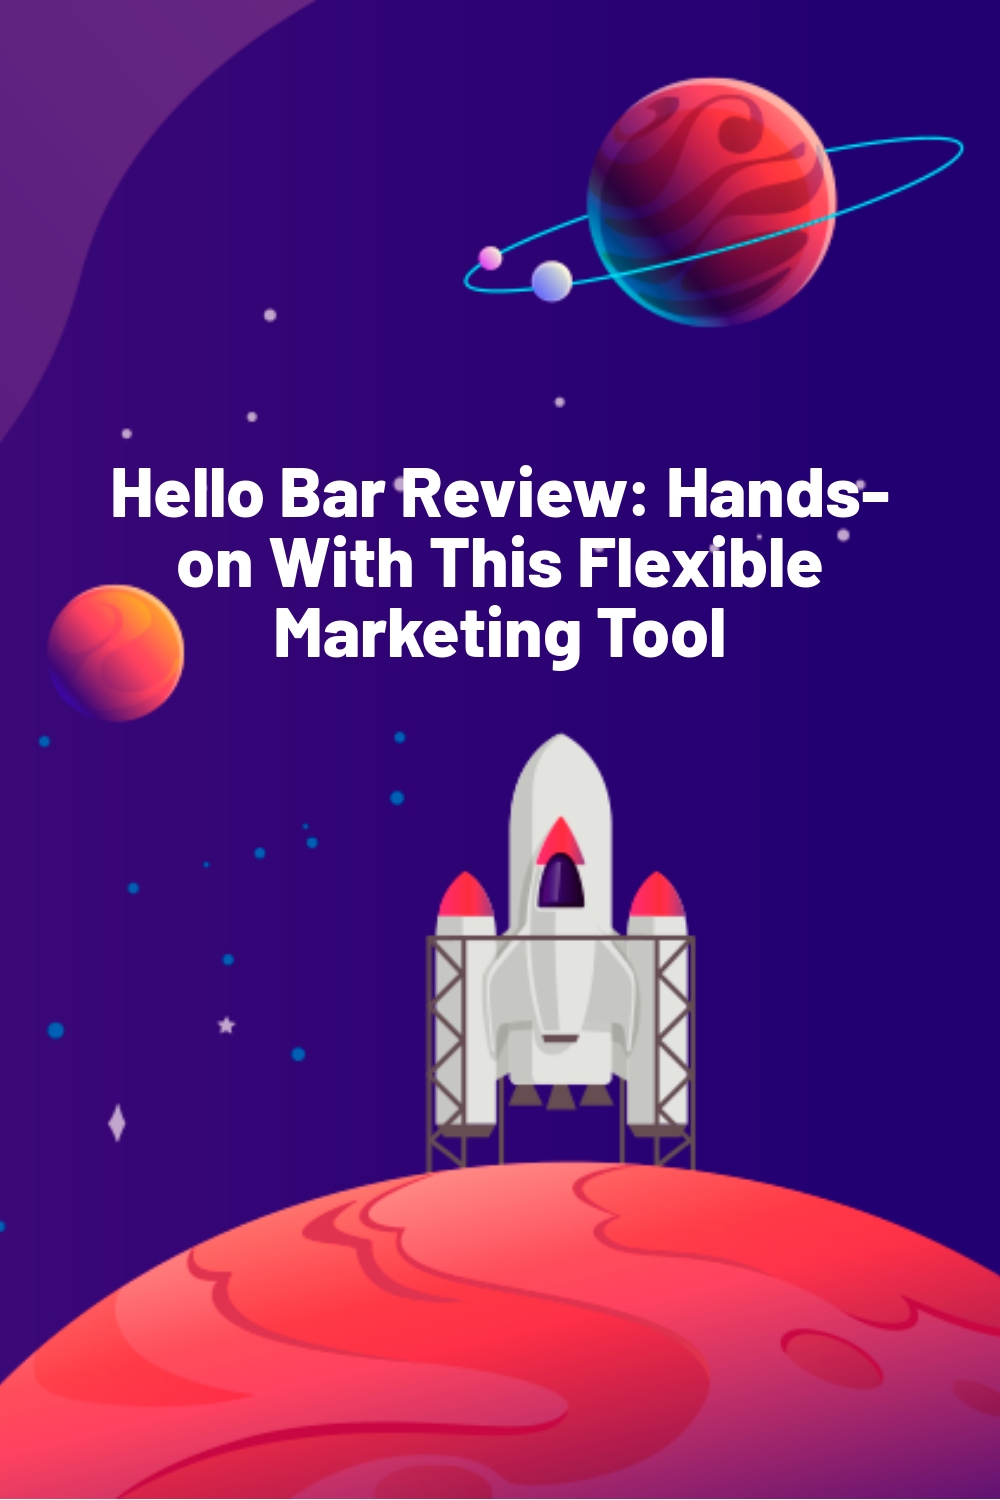 Hello Bar Review: Hands-on With This Flexible Marketing Tool